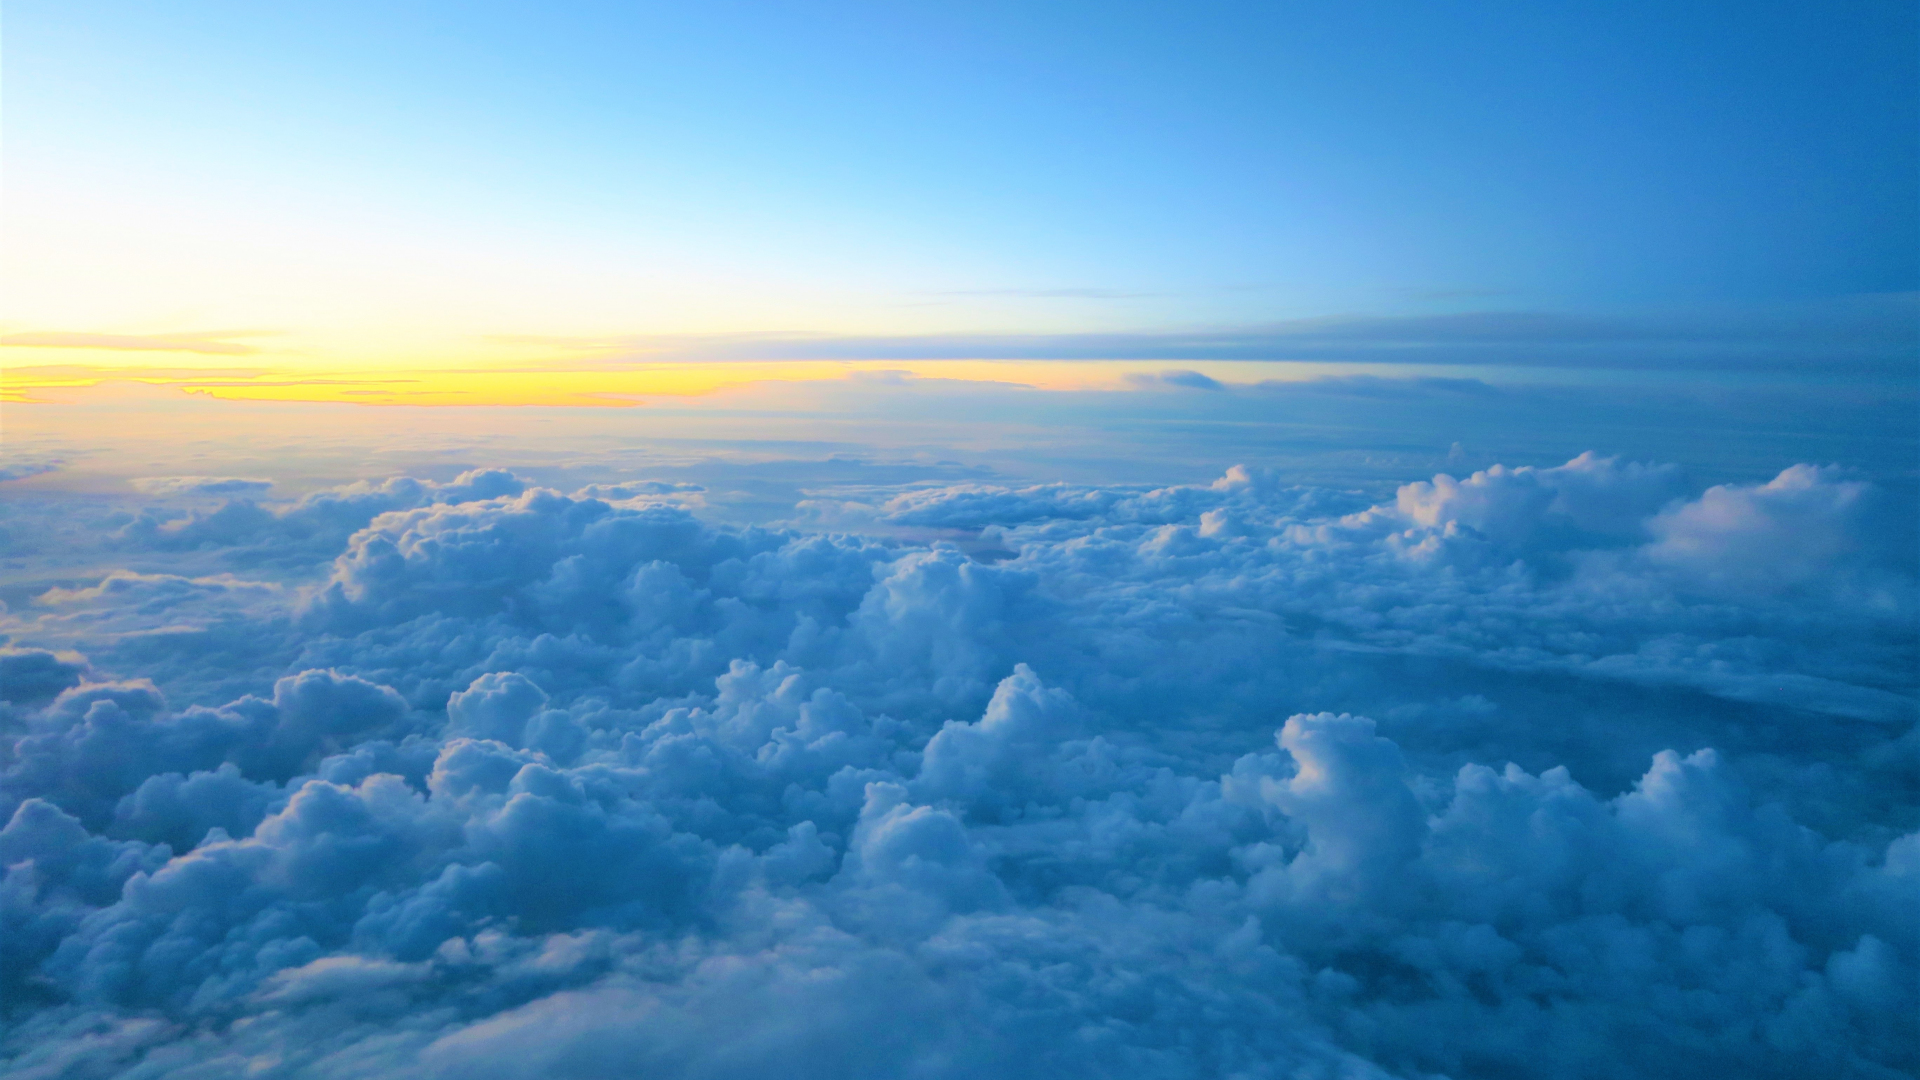 Download Wallpaper 1920X1080 Clouds And Sunset, Sky, Sea Of Clouds